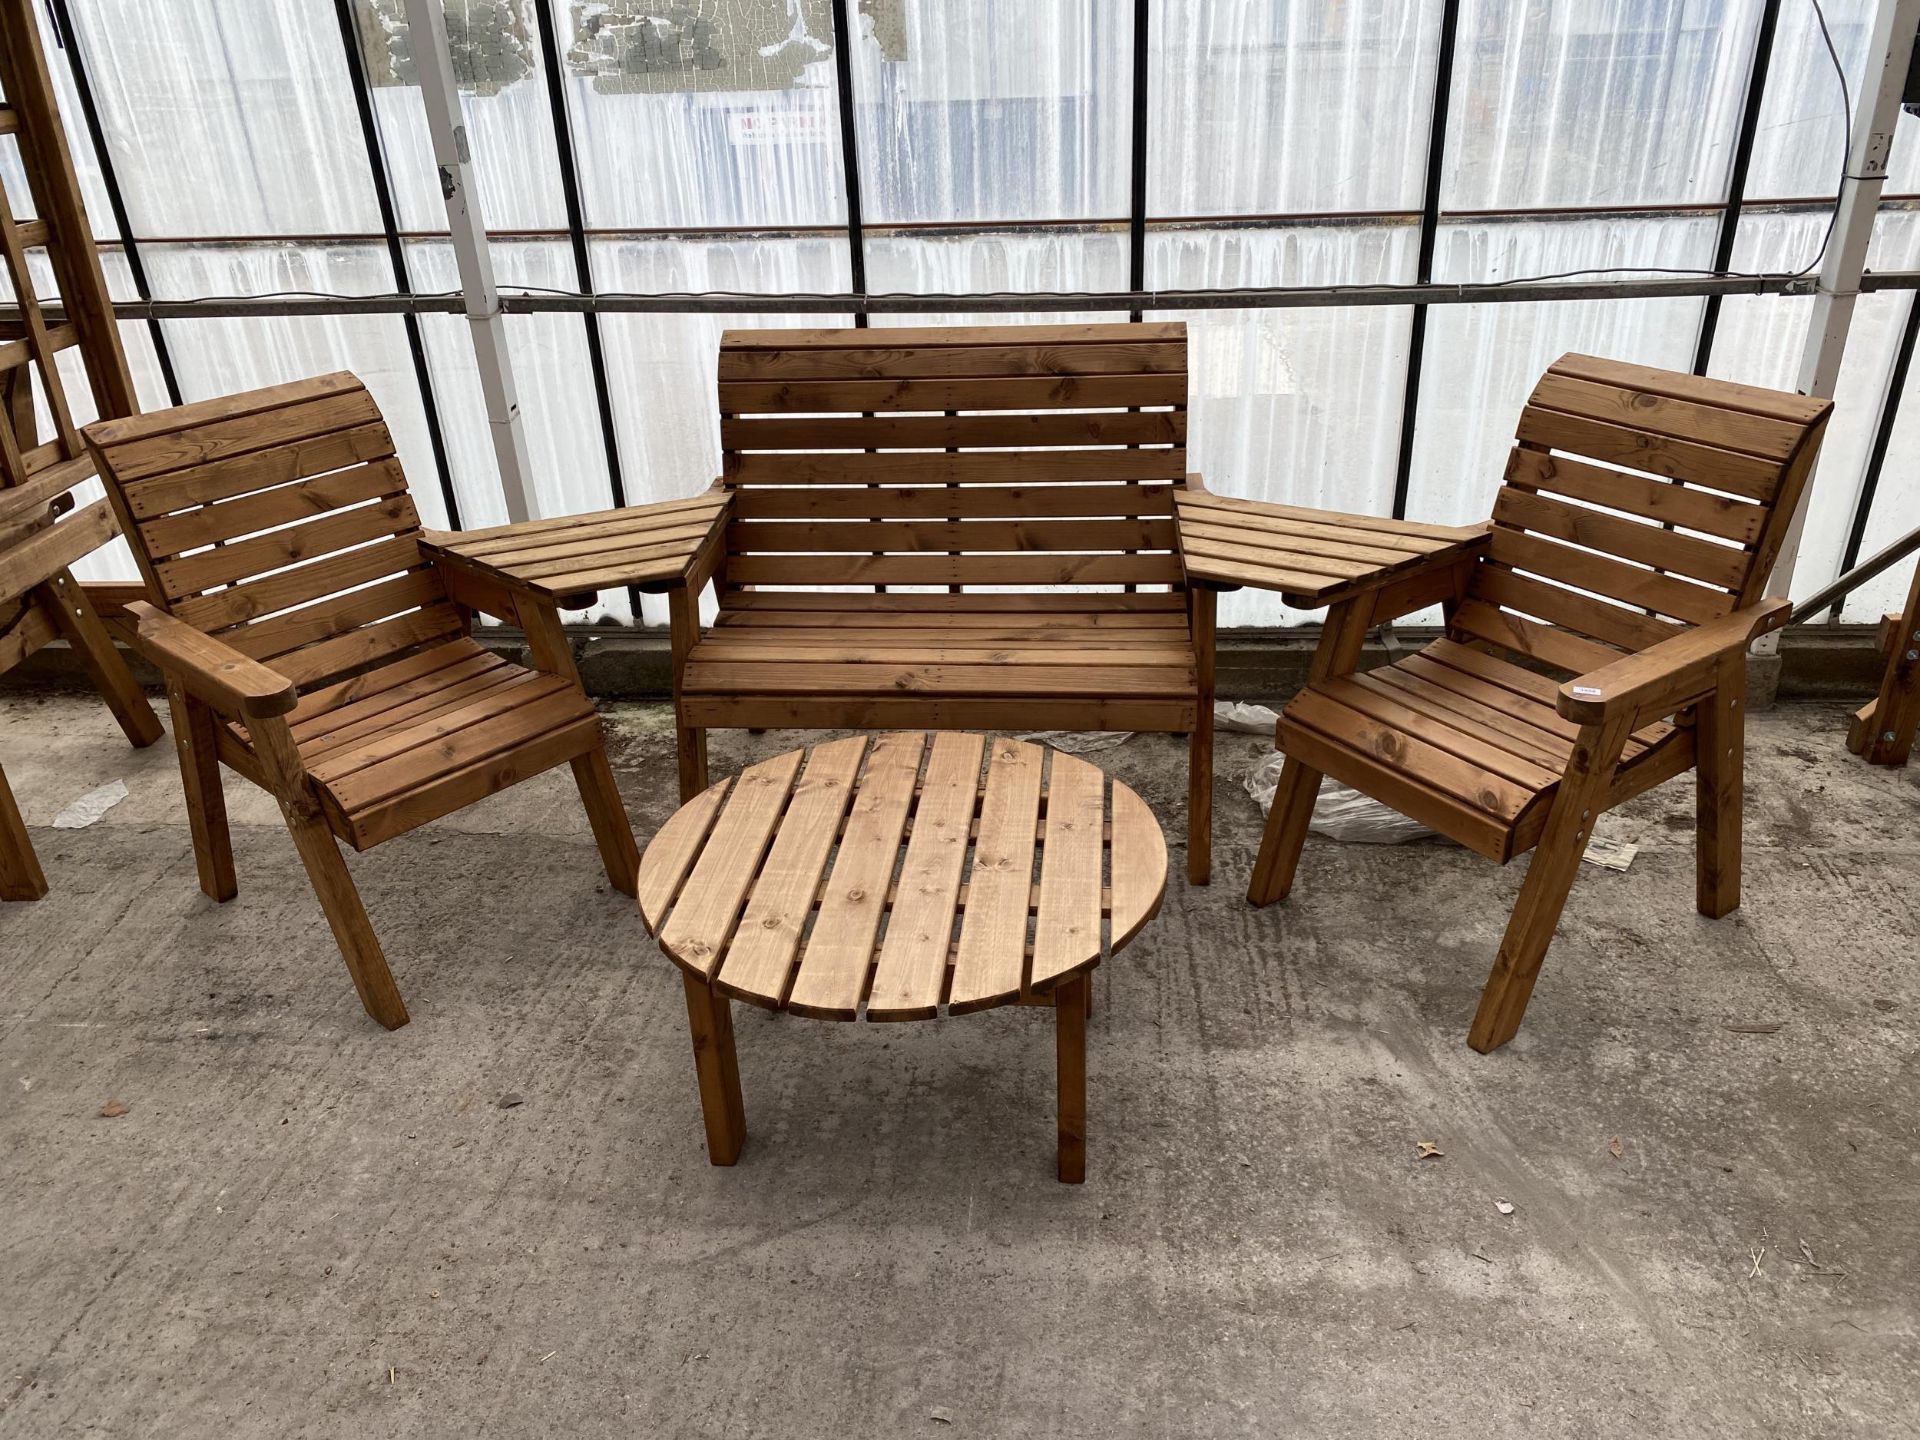 AN AS NEW EX DISPLAY CHARLES TAYLOR PATIO FURNITURE SET COMPRISING OF A TWO SEATER BENCH, TWO